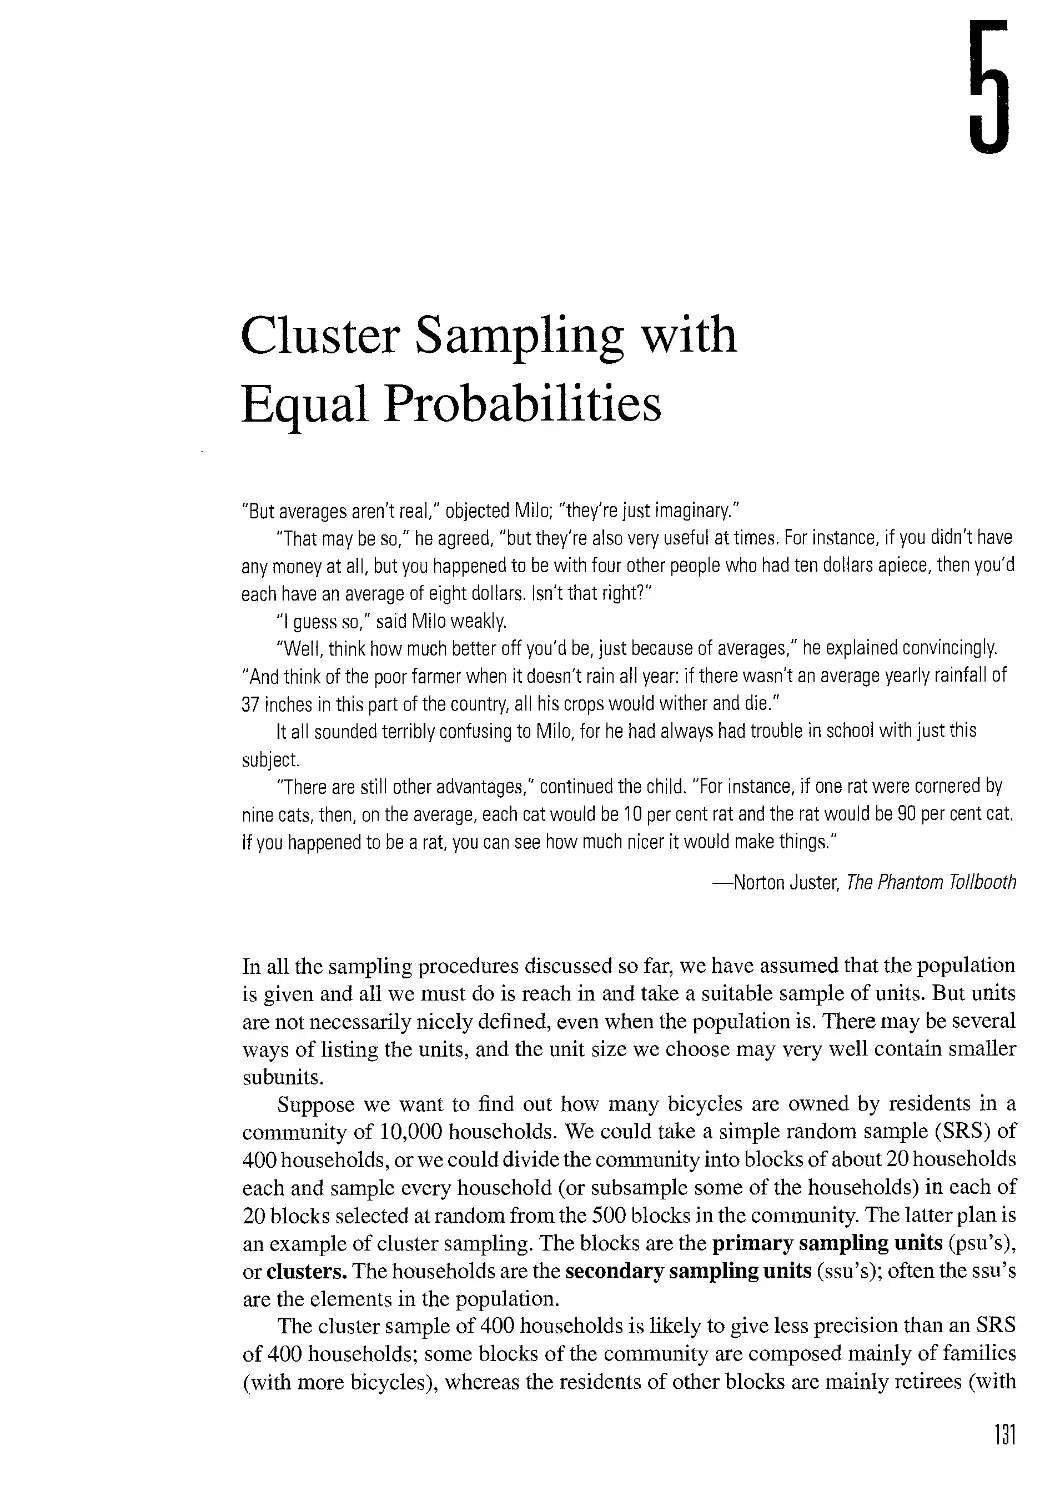 5 Cluster Sampling with Equal Probabilities